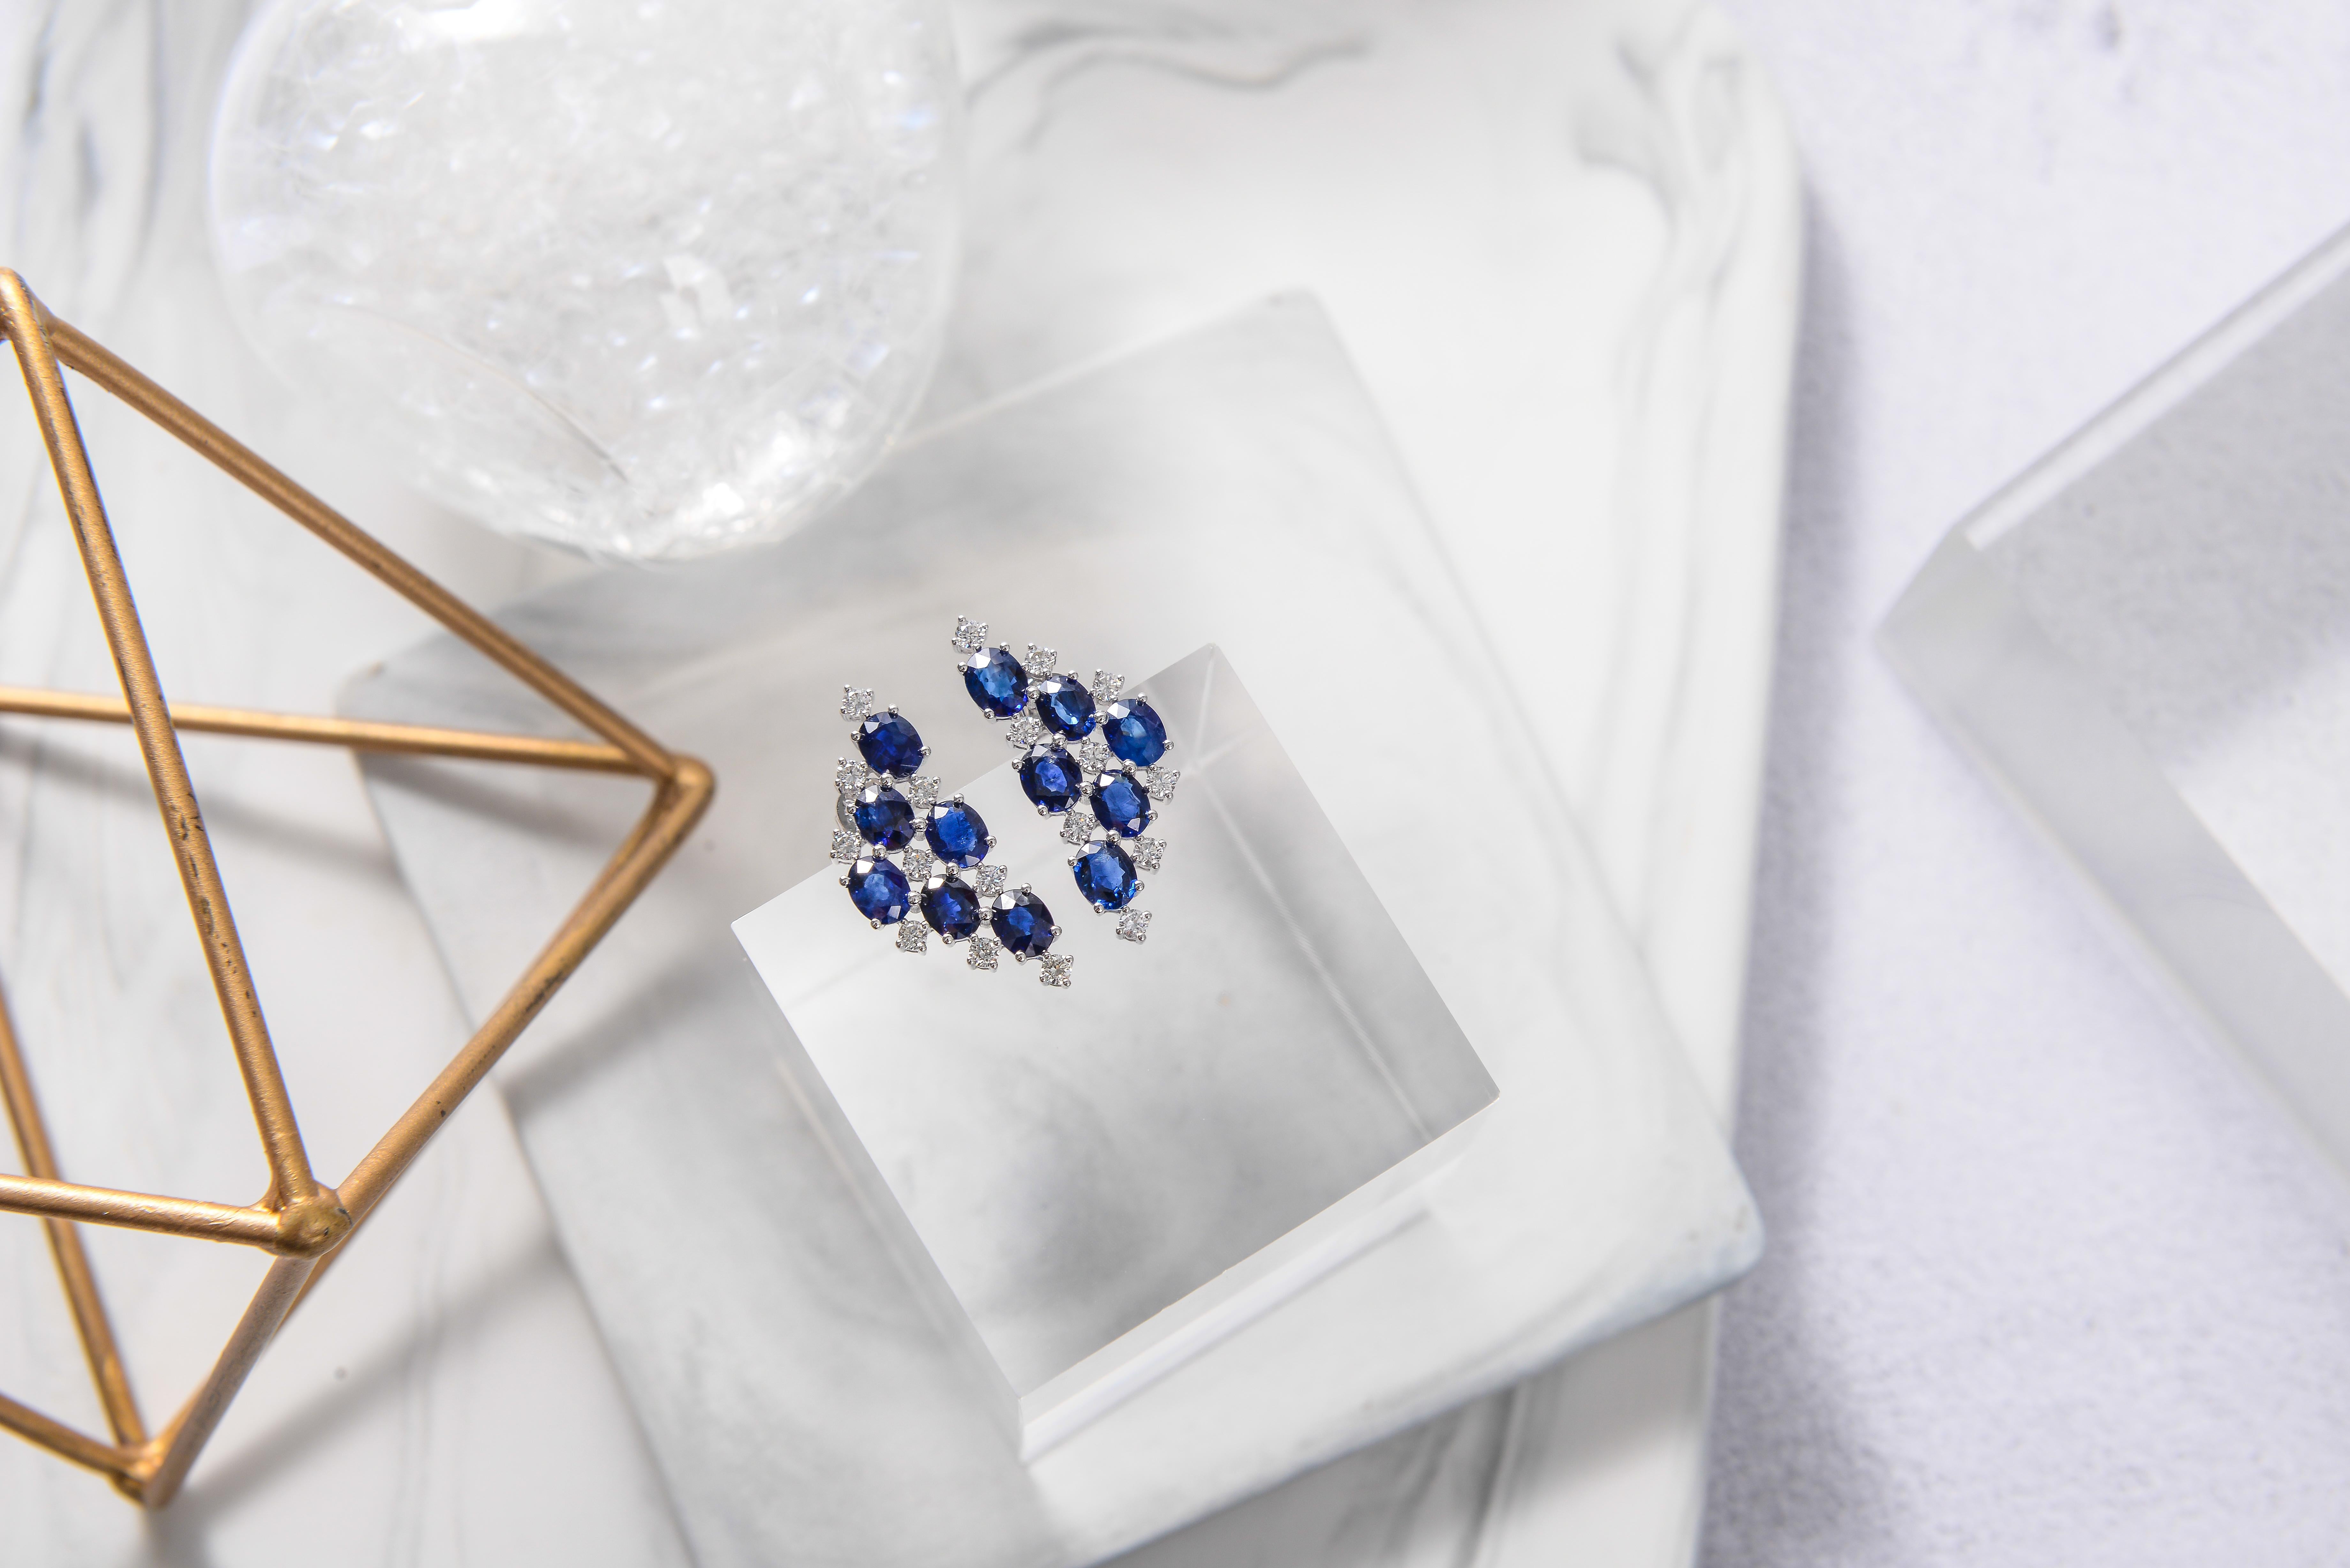 The Earring is in a triangle geometric design with Sapphire and Diamond alternating each other on a opened frame work. The opened frame setting allows more lights to pass through and therefore brighten the colour of the sapphire. The orientation of